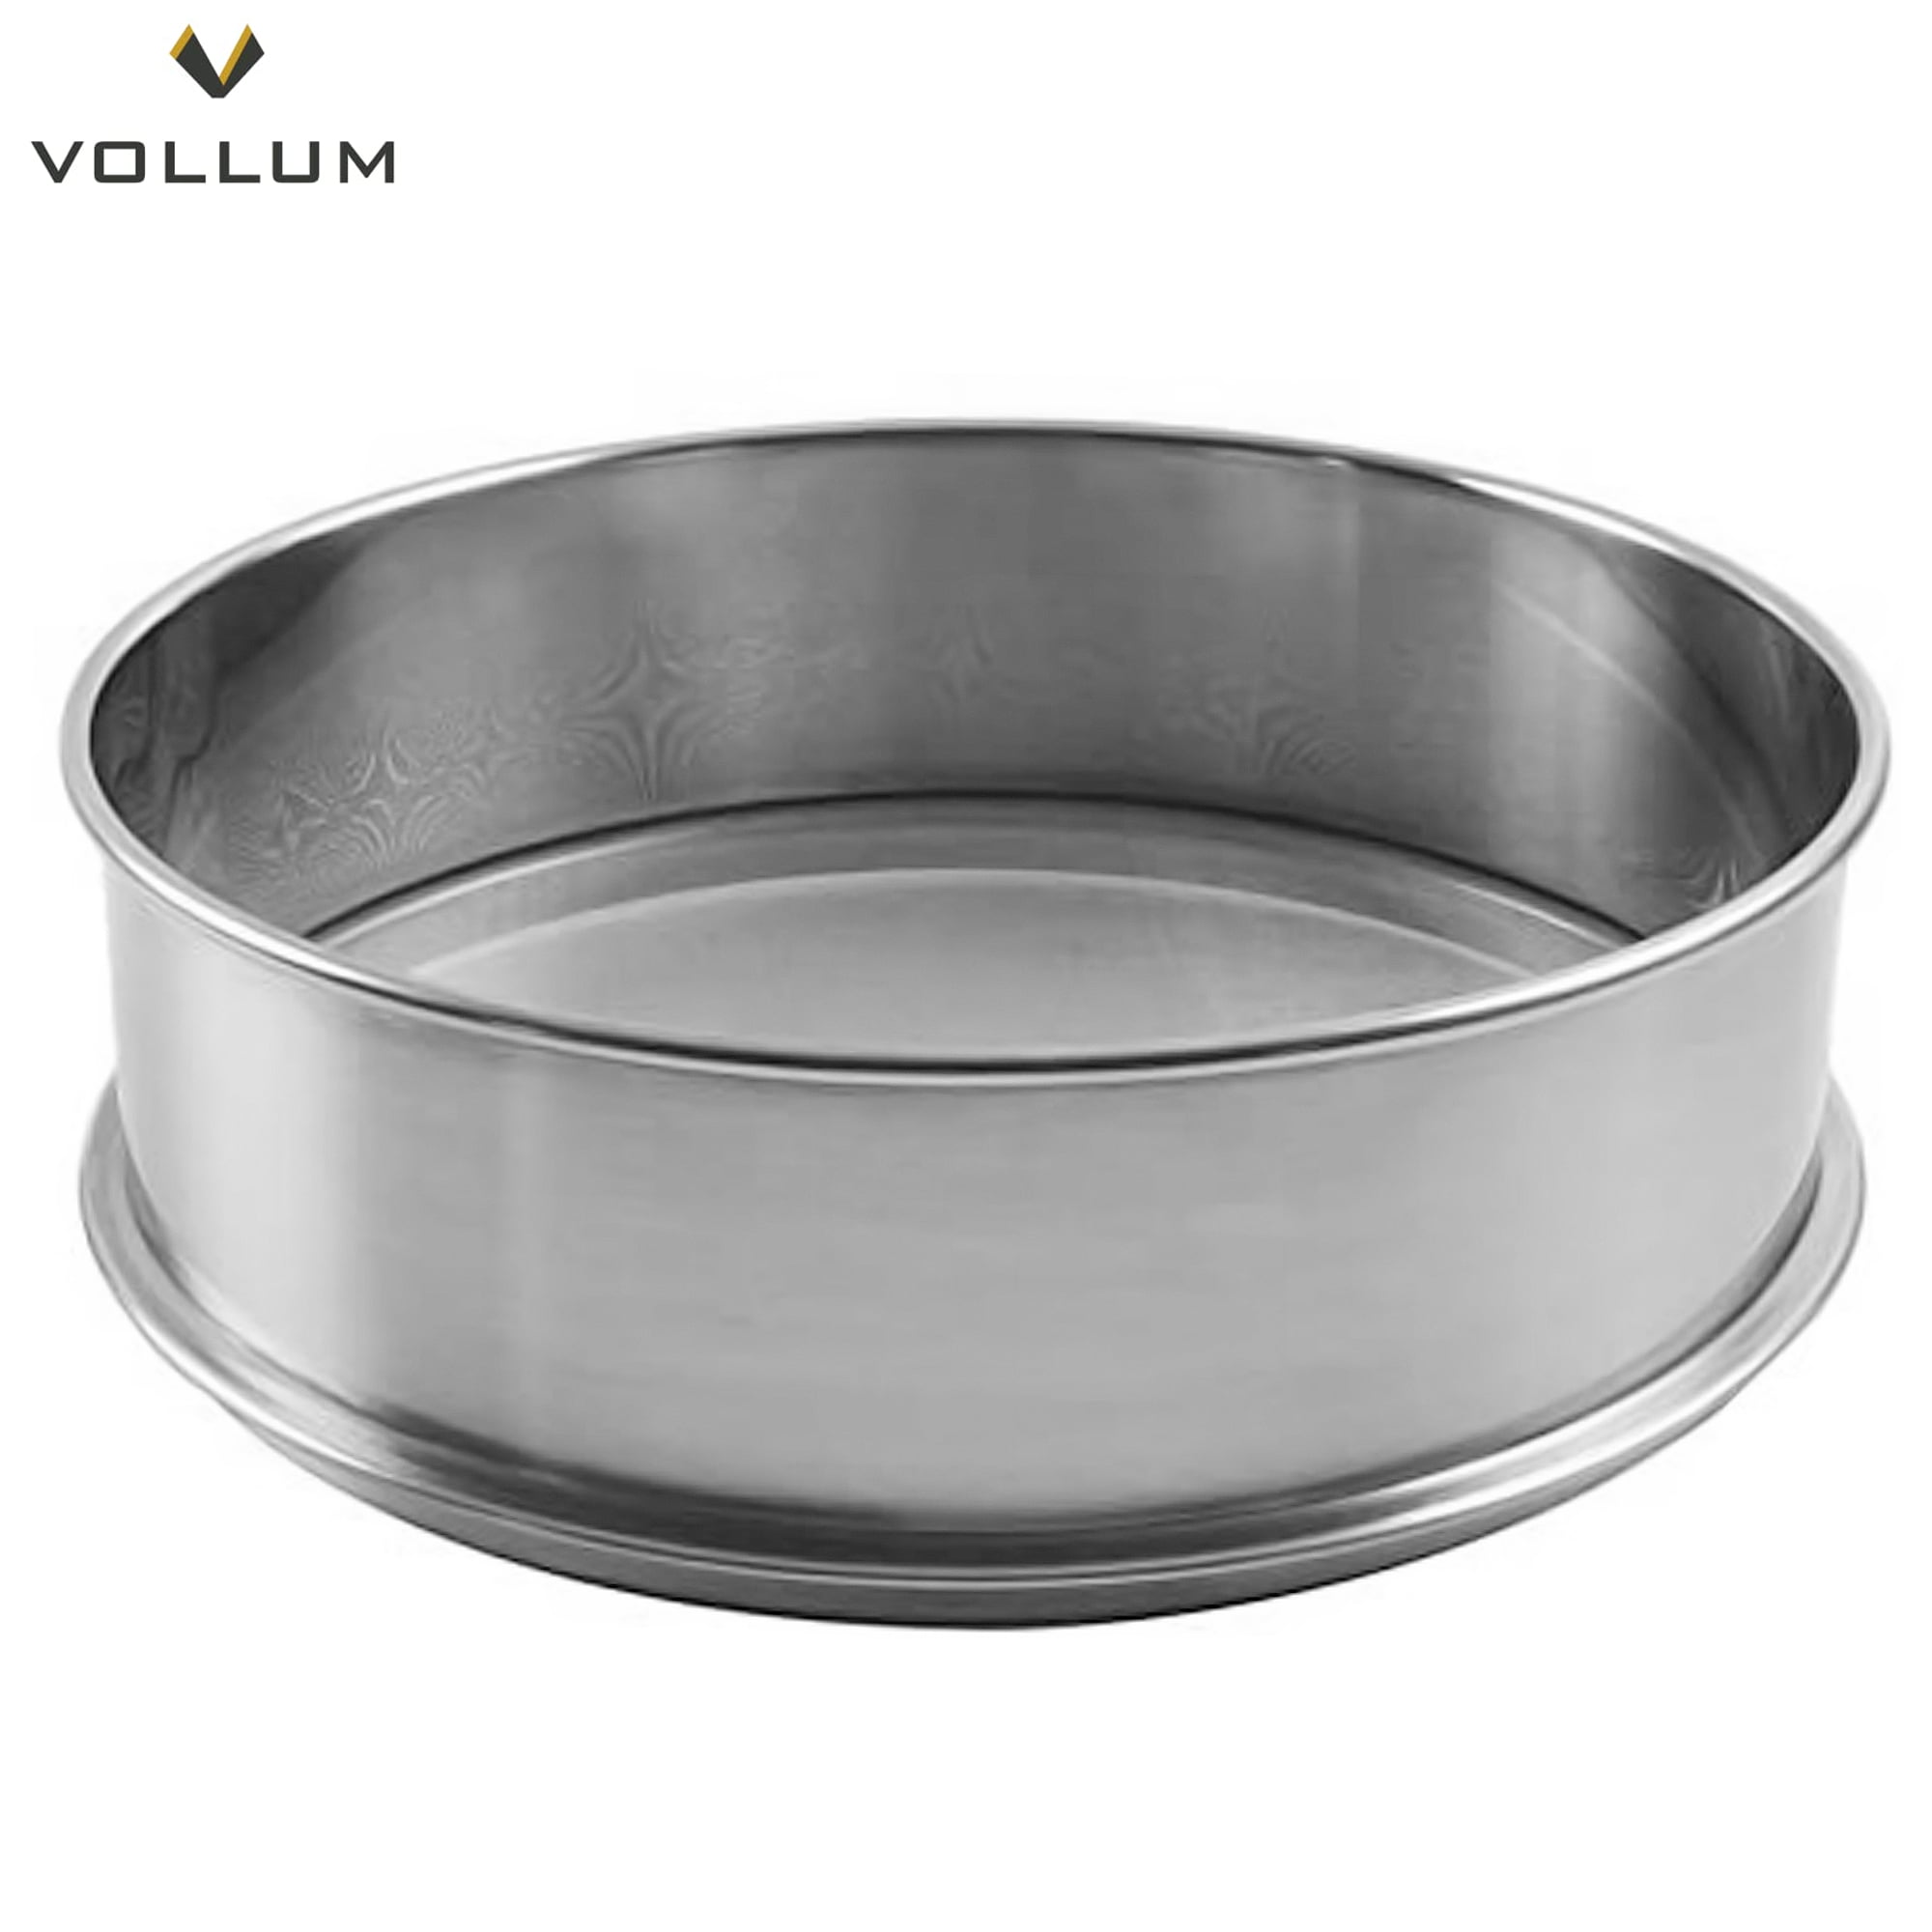 Stainless Steel Mesh Flour Sifter Sieves Strainer Cake Baking Kitchen tool